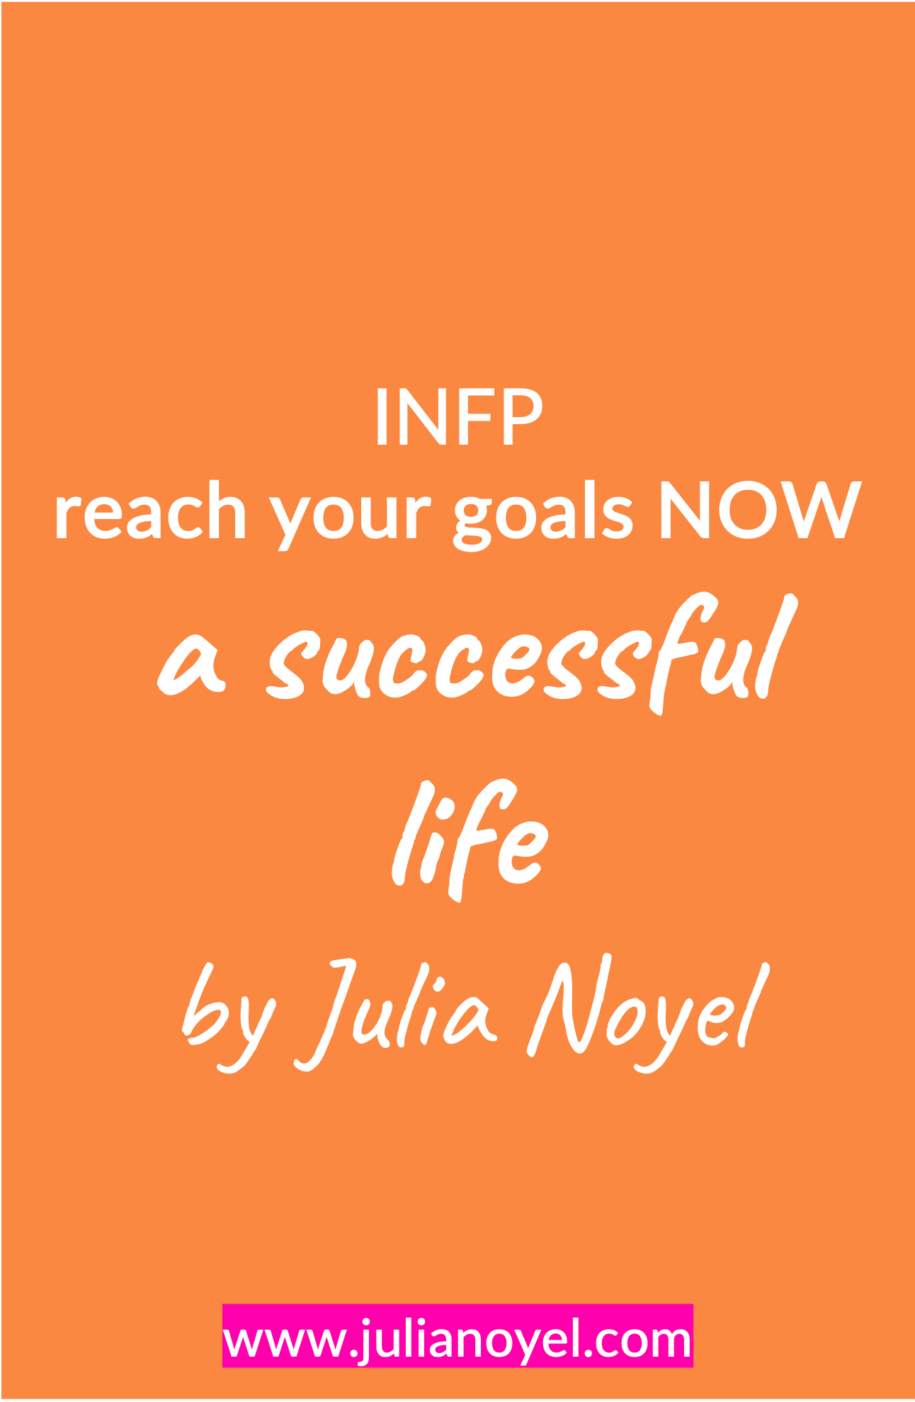 INFP reach your goals NO